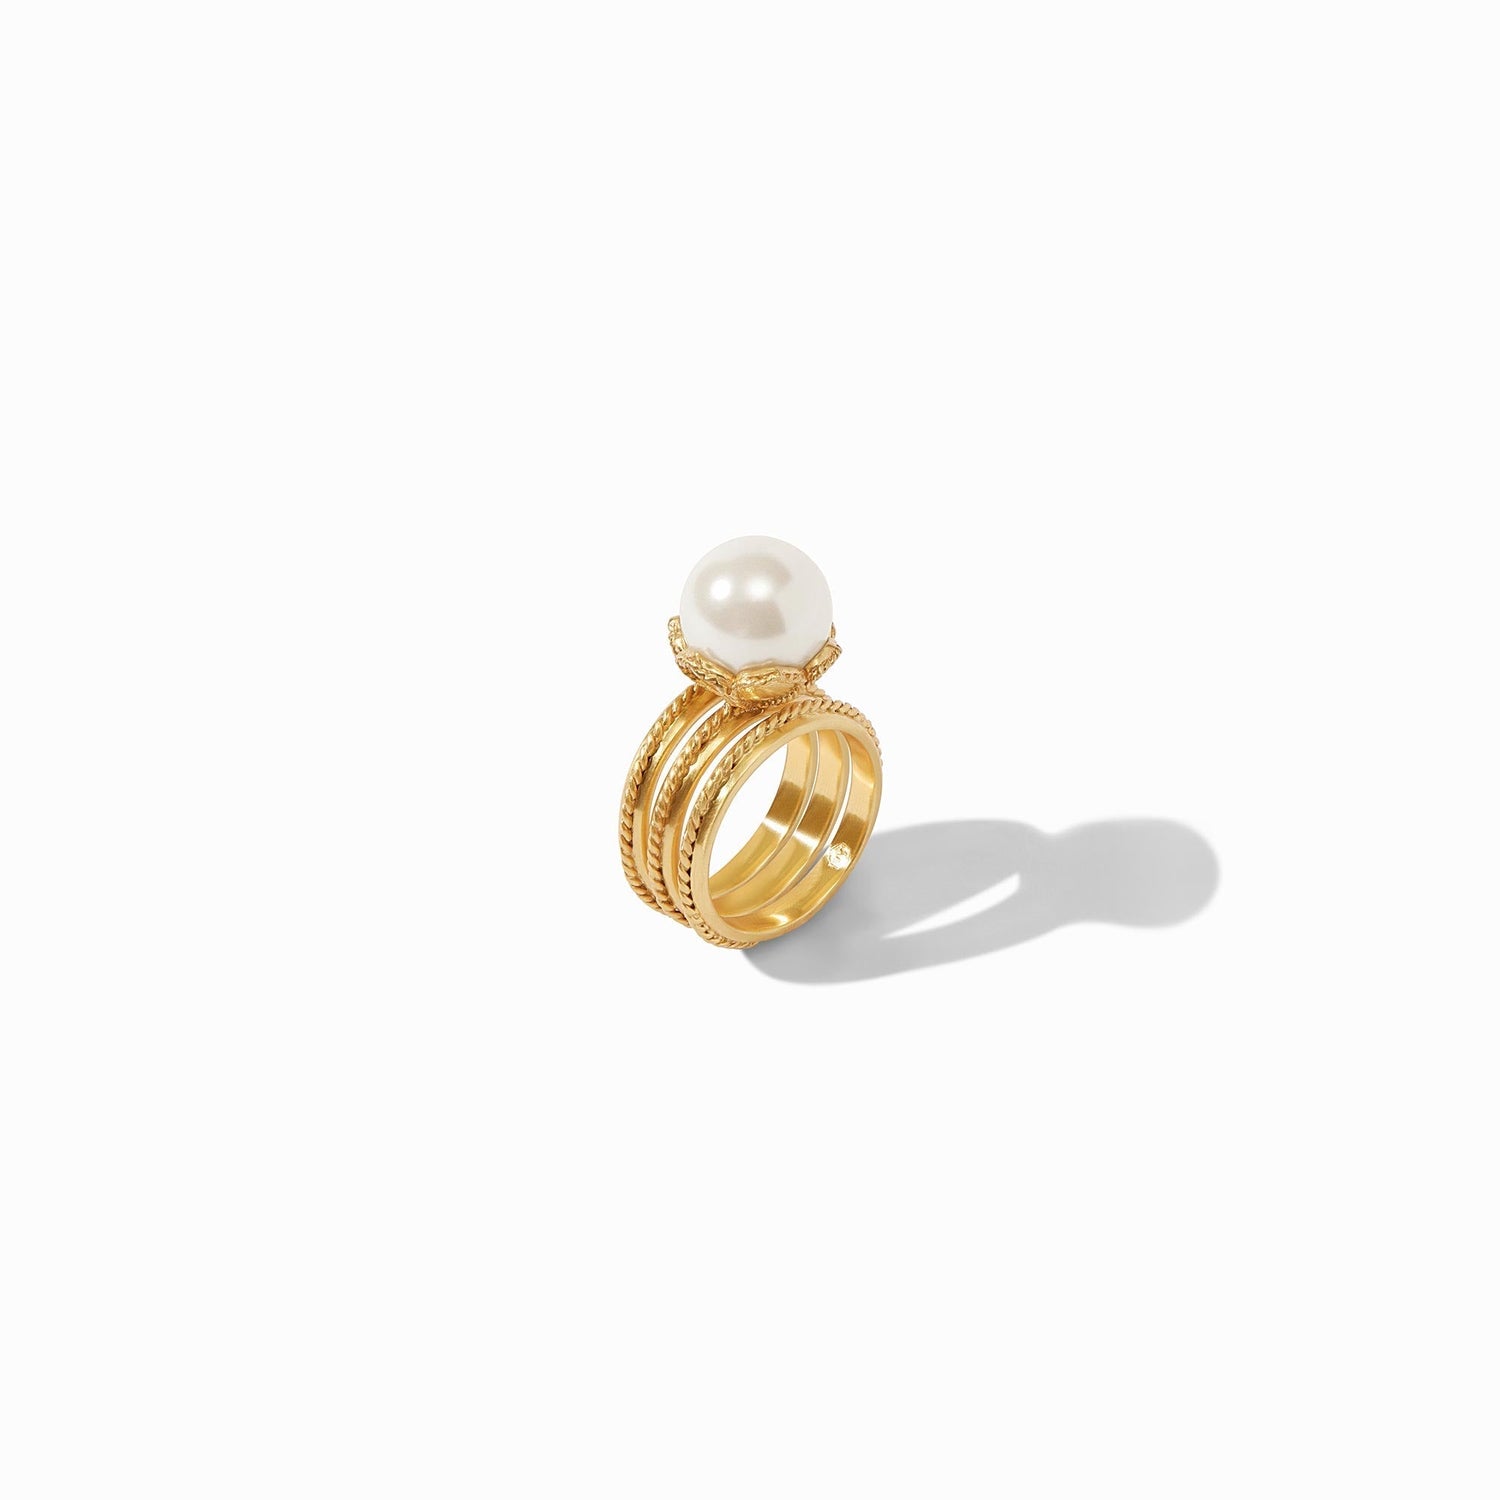 Delphine Pearl Ring Set - Gaines Jewelers